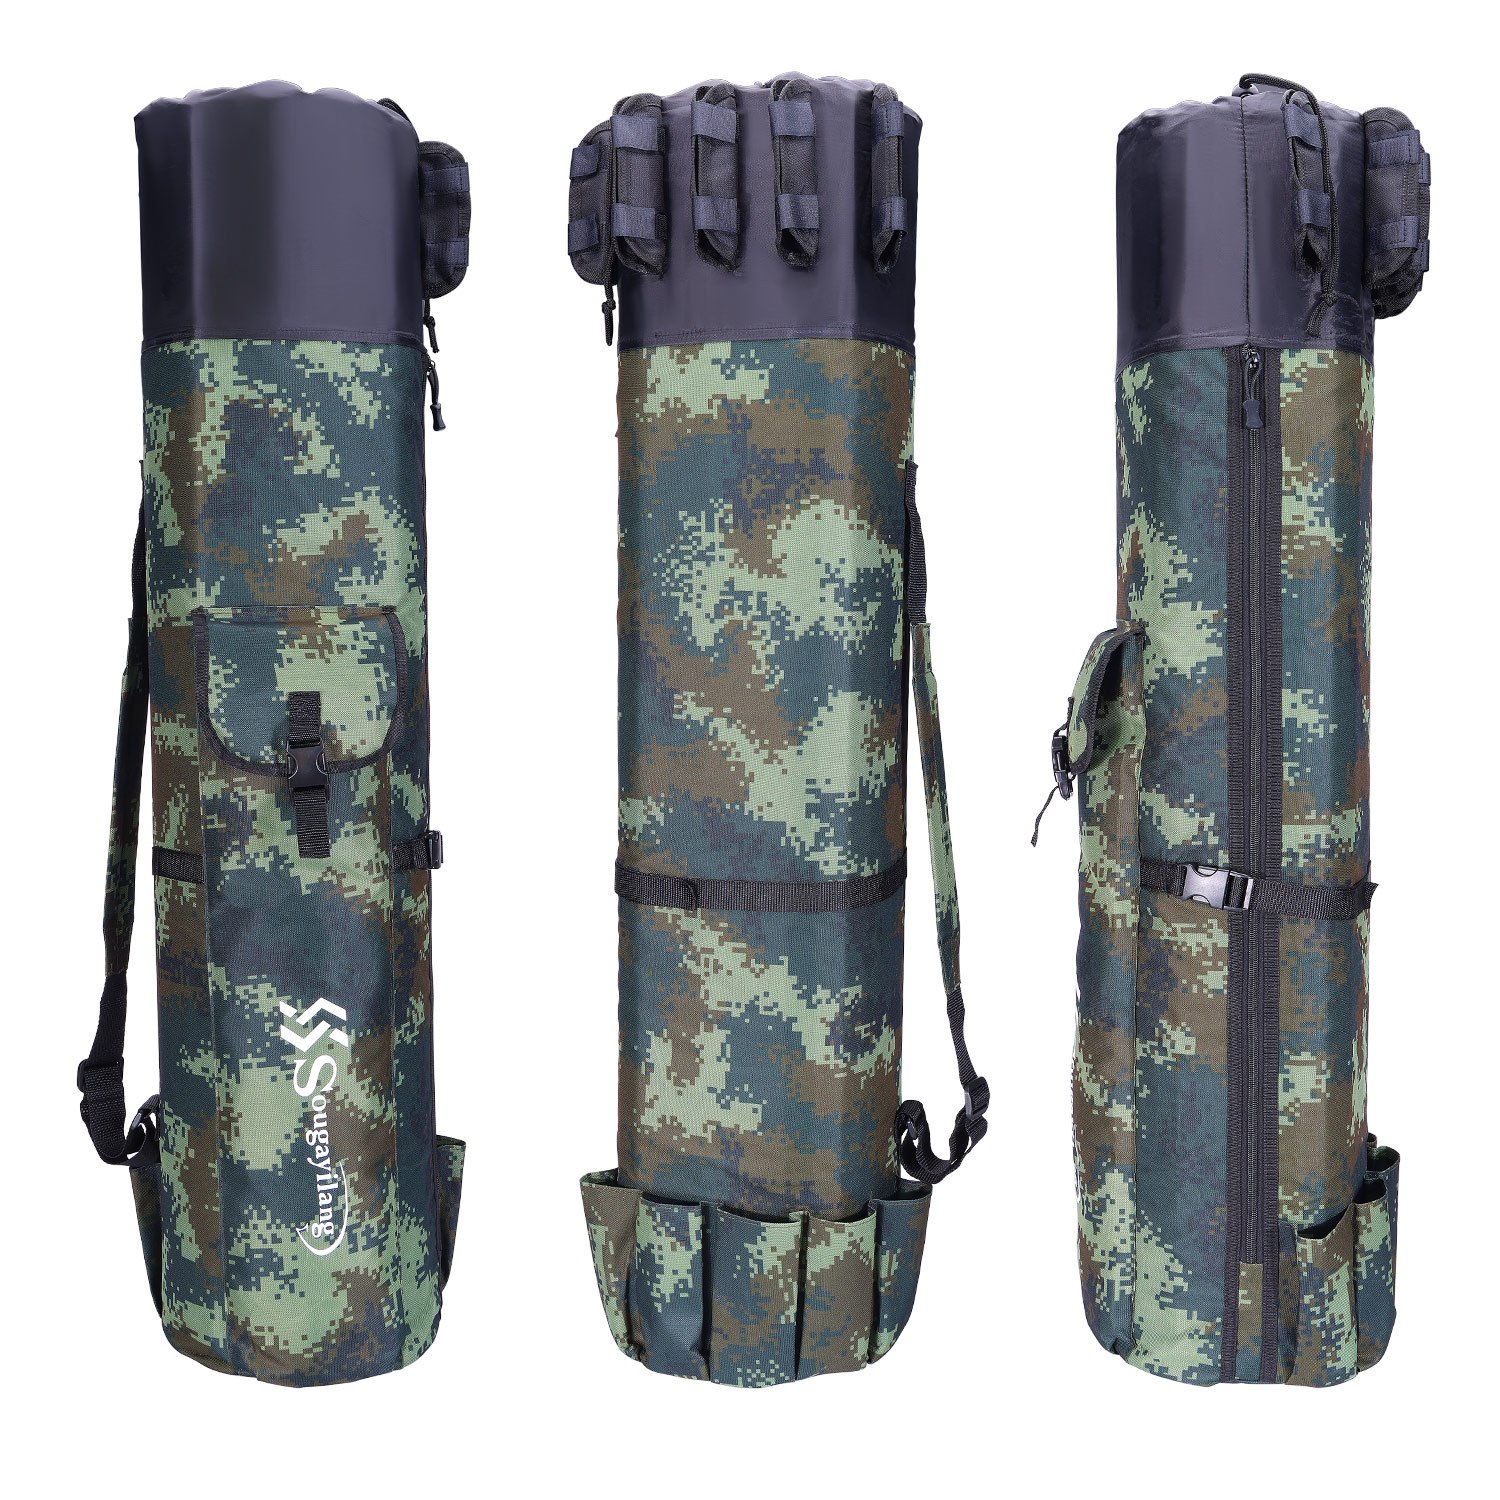 Fishing rod bag, waterproof fishing pole case bag with durable  folding,portable fishing rod case holds 5 poles&tackle